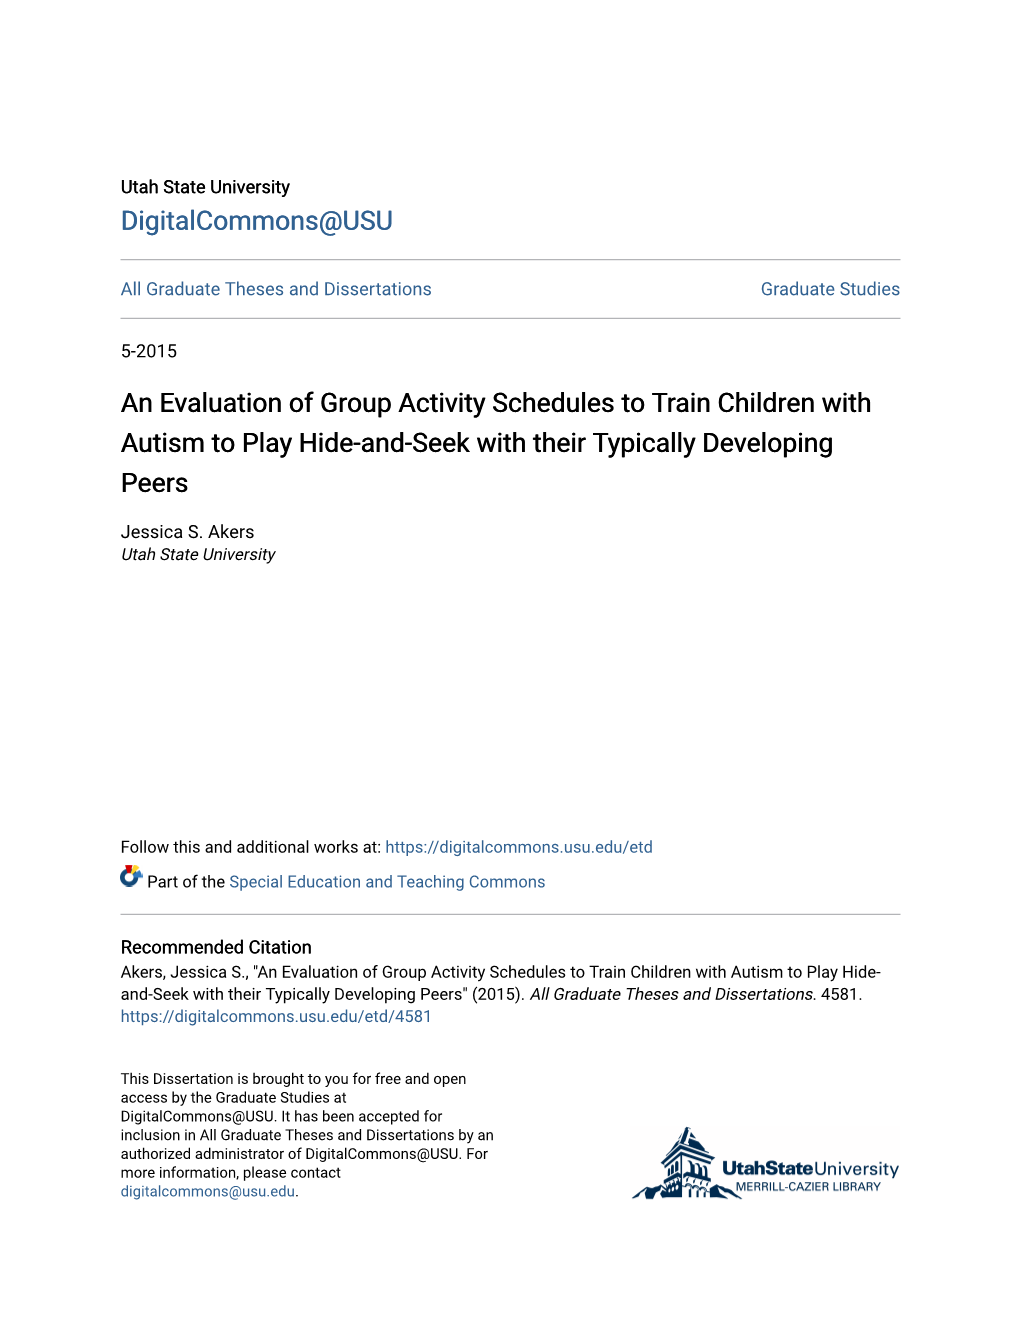 An Evaluation of Group Activity Schedules to Train Children with Autism to Play Hide-And-Seek with Their Typically Developing Peers